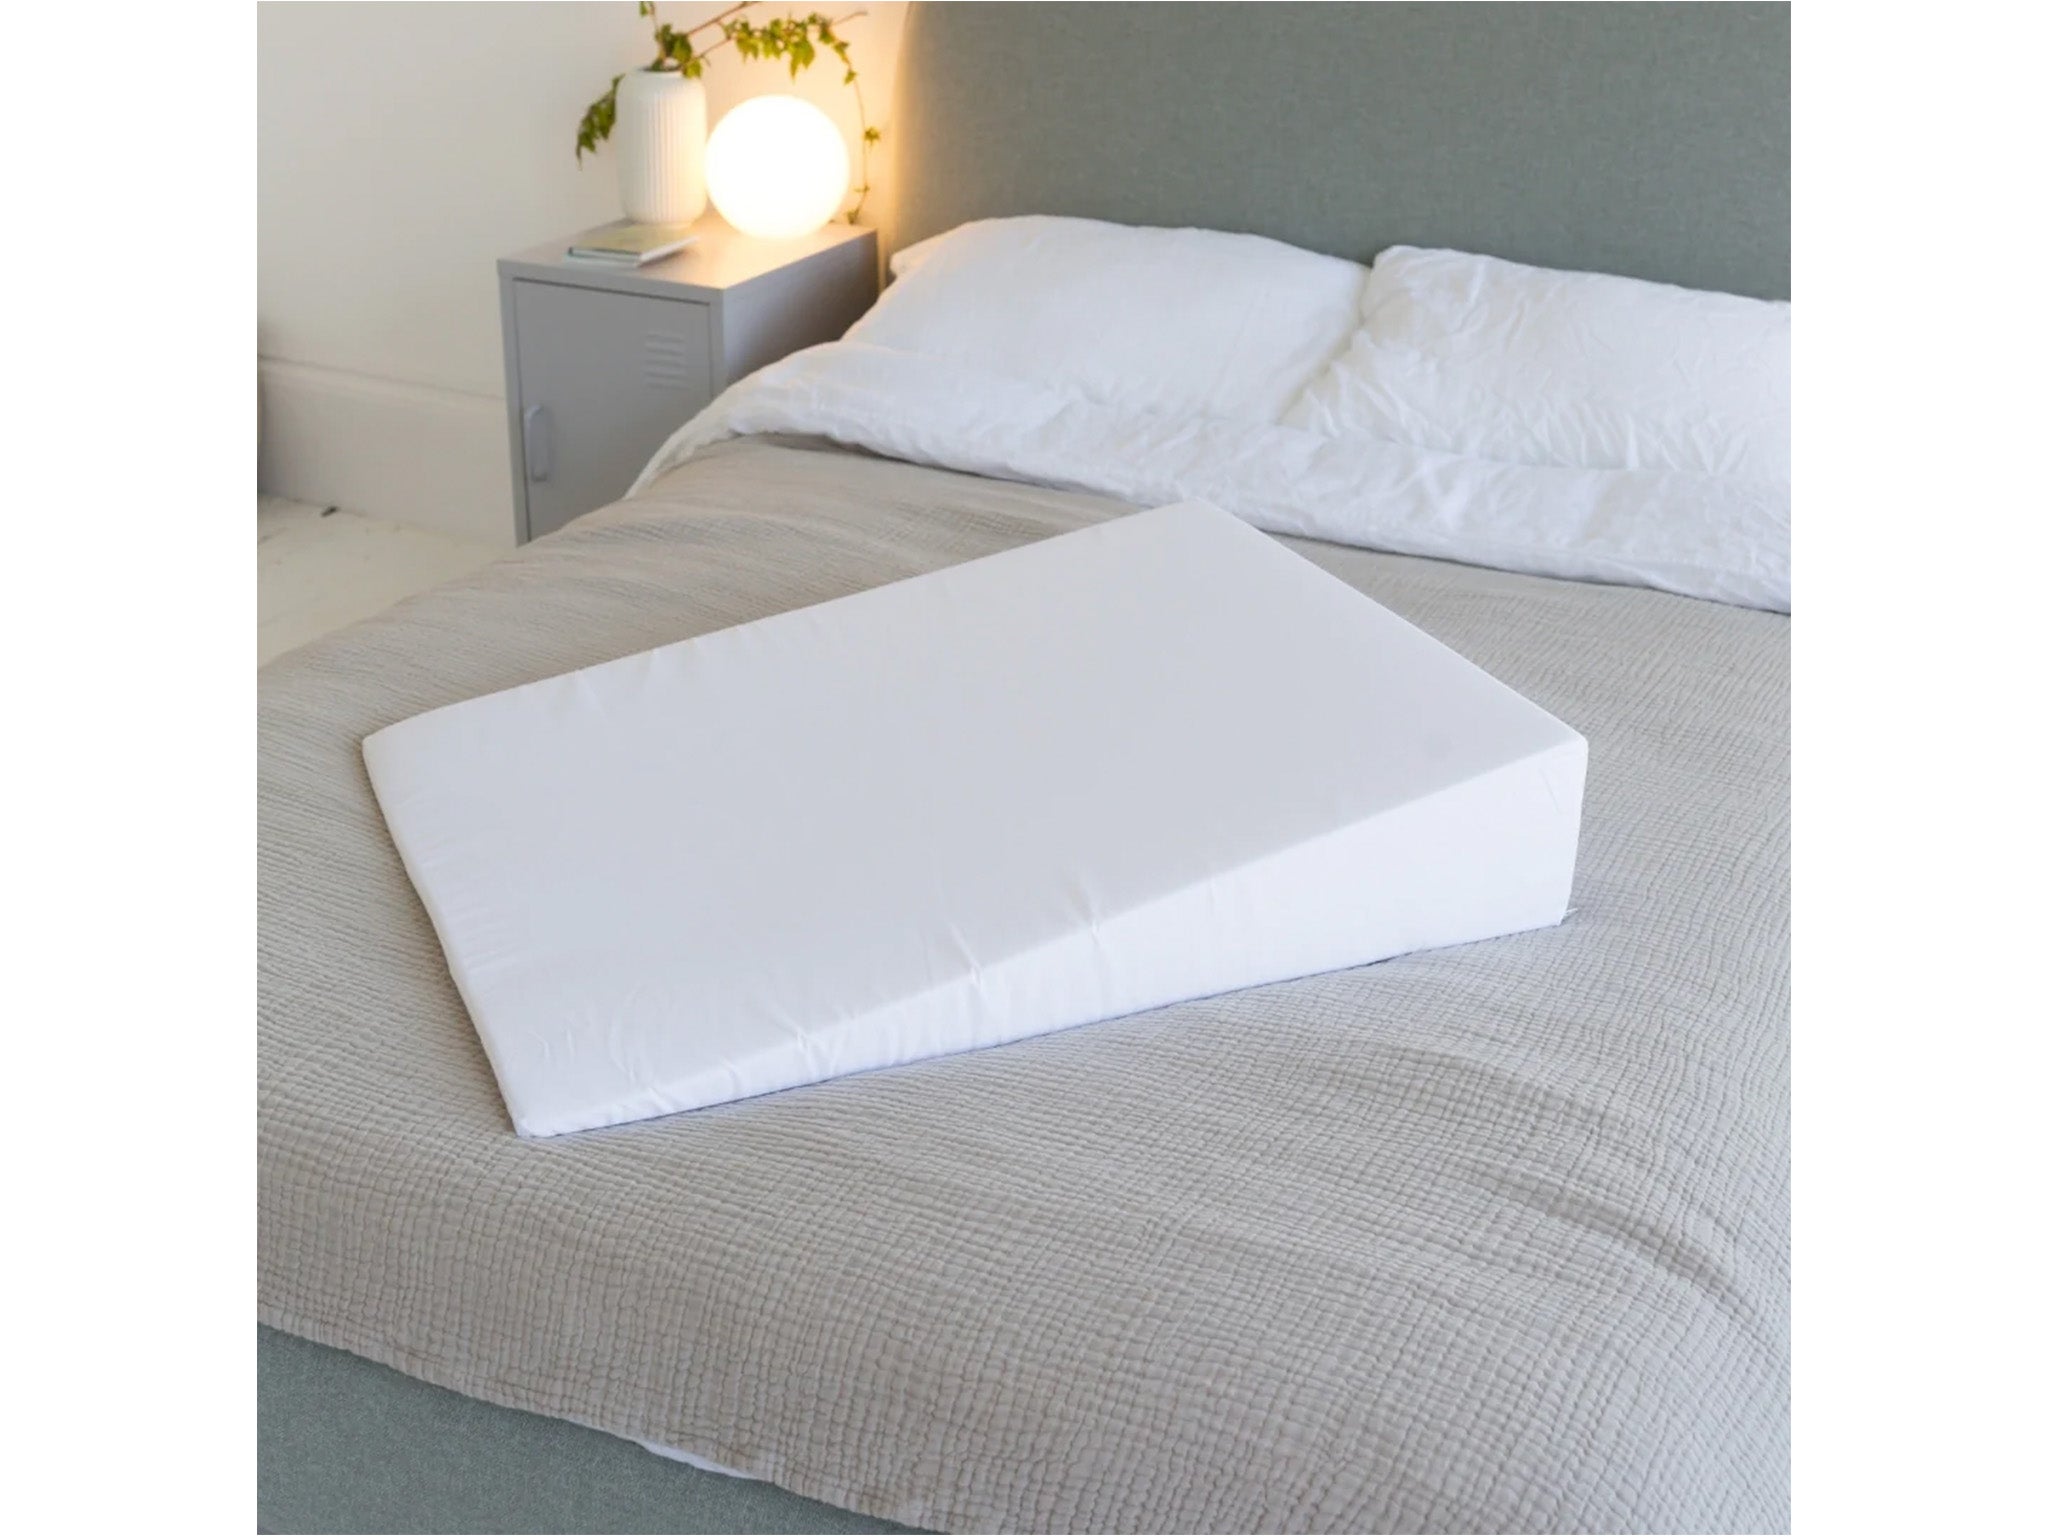 Putnams anti-snore bed wedge pillow